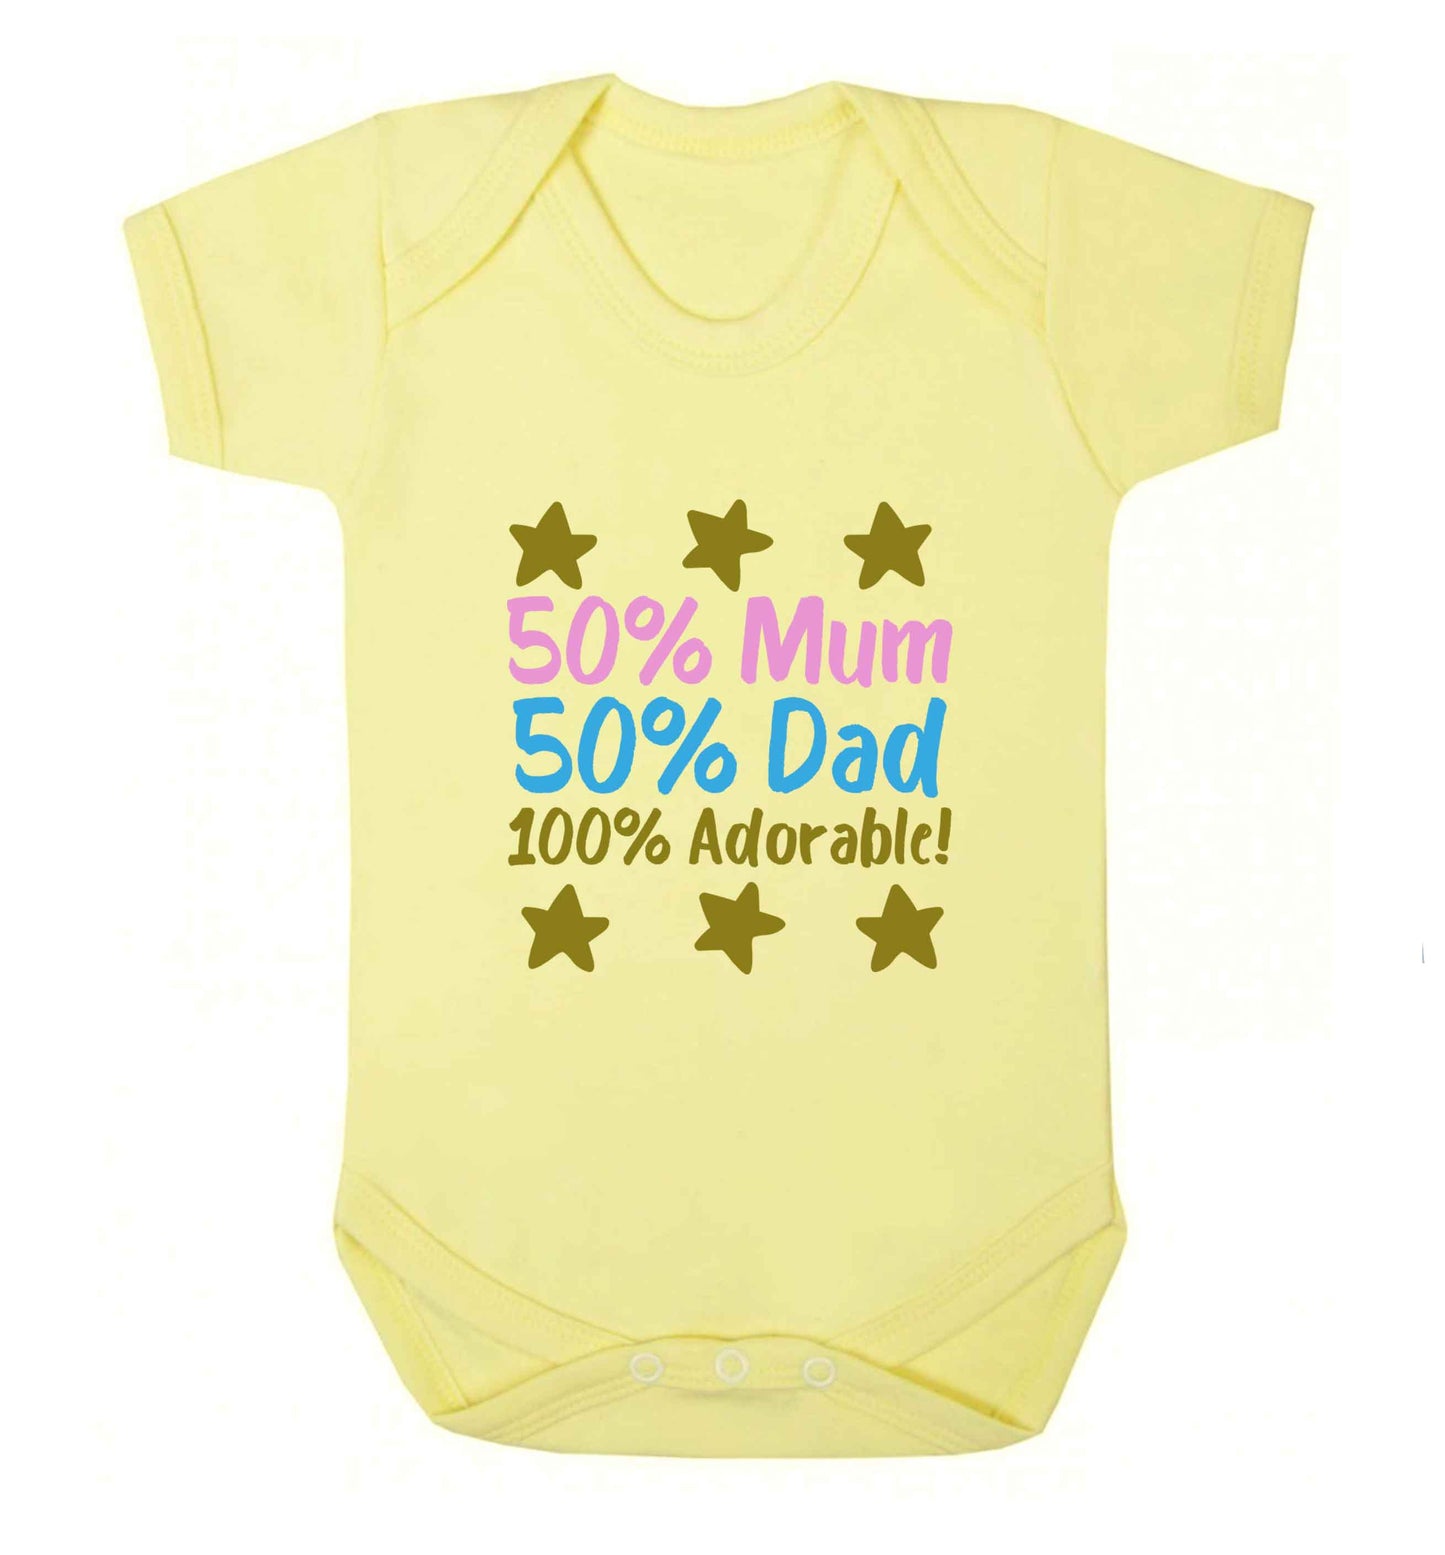 50% mum 50% dad 100% adorable baby vest pale yellow 18-24 months